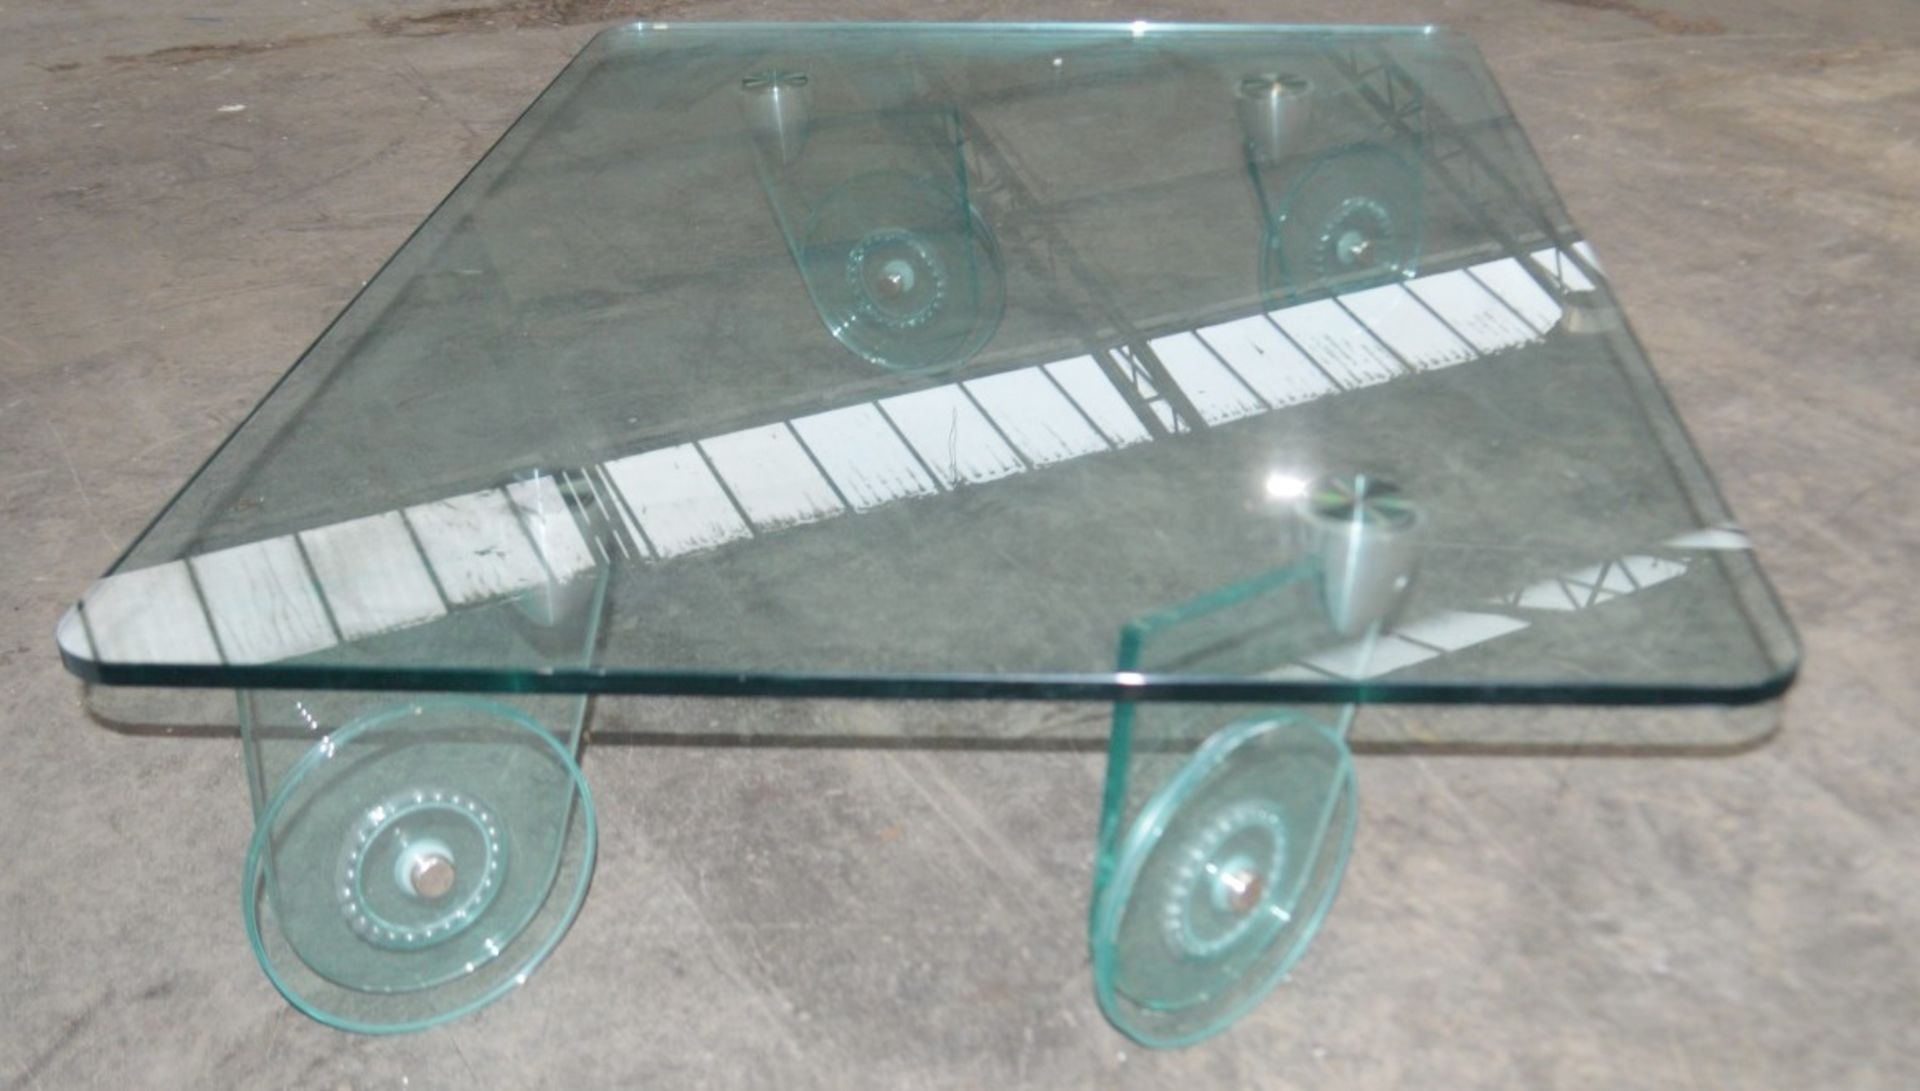 1 x Display Trolley Made Of Toughened Glass - Dimensions: W125 x D85 x H29cm - Ref: MHB165 - CL670 -